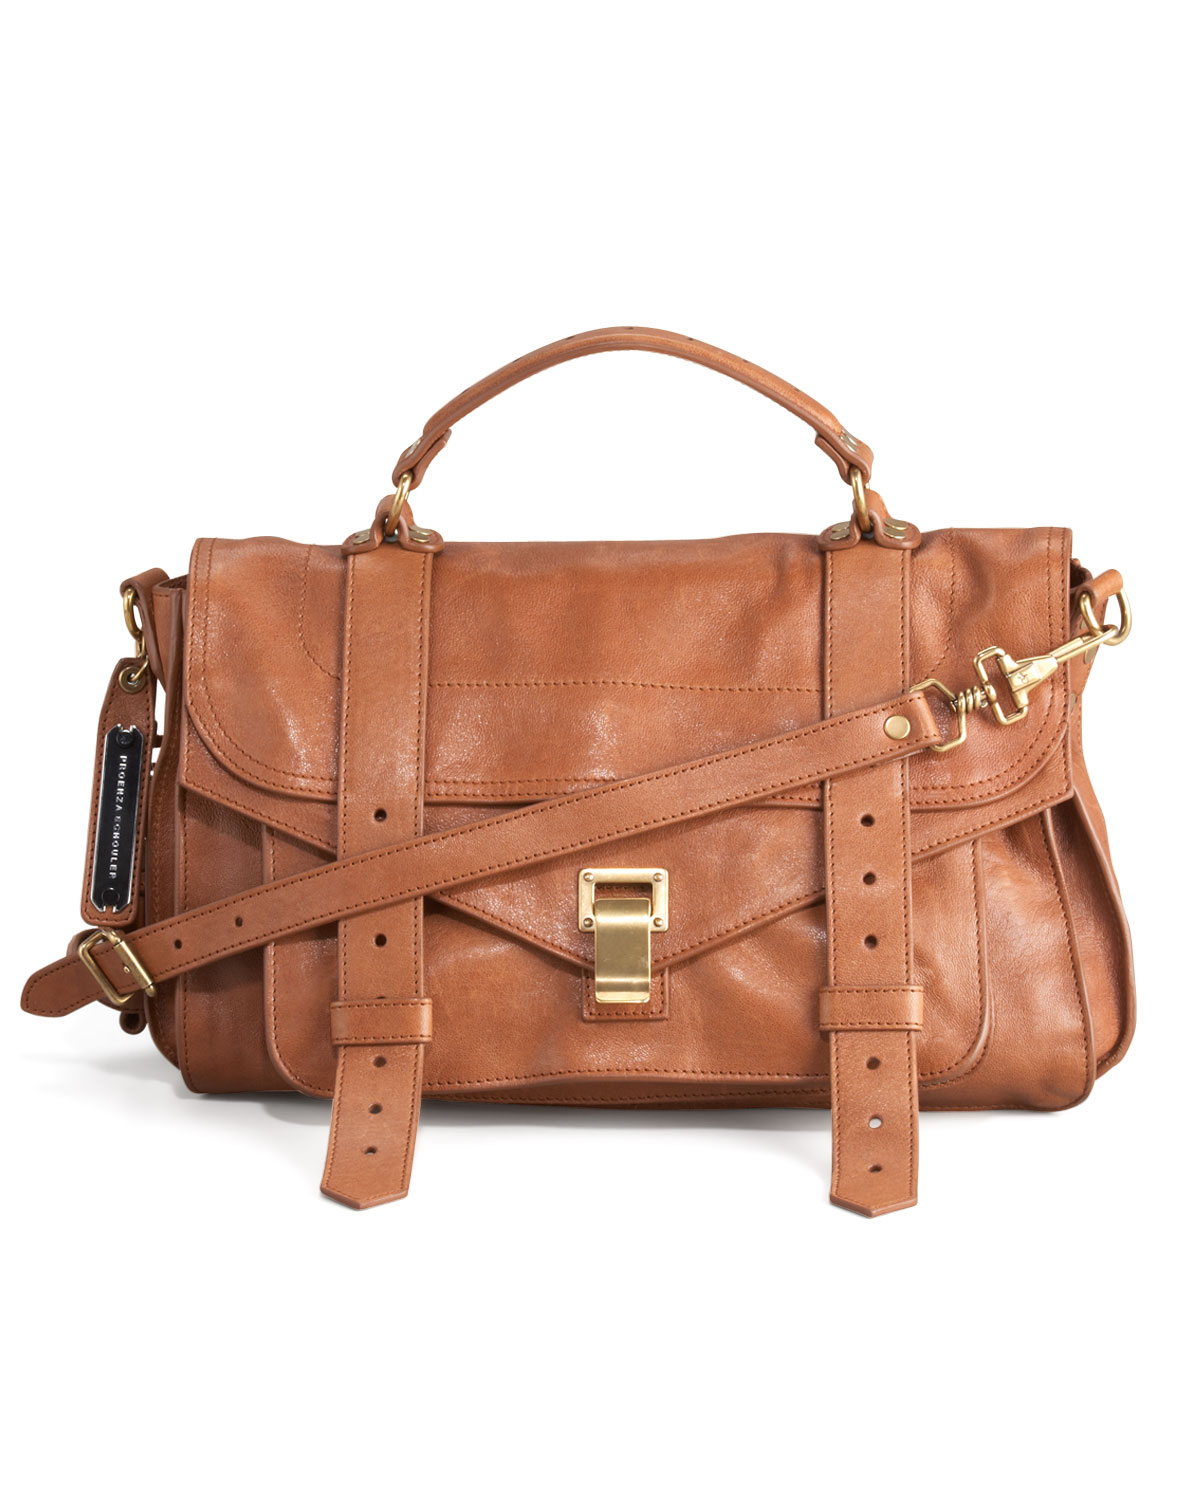 Why To Buy Proenze Schouler Bag? Is It Worth Investing? Reveal The Information Here!